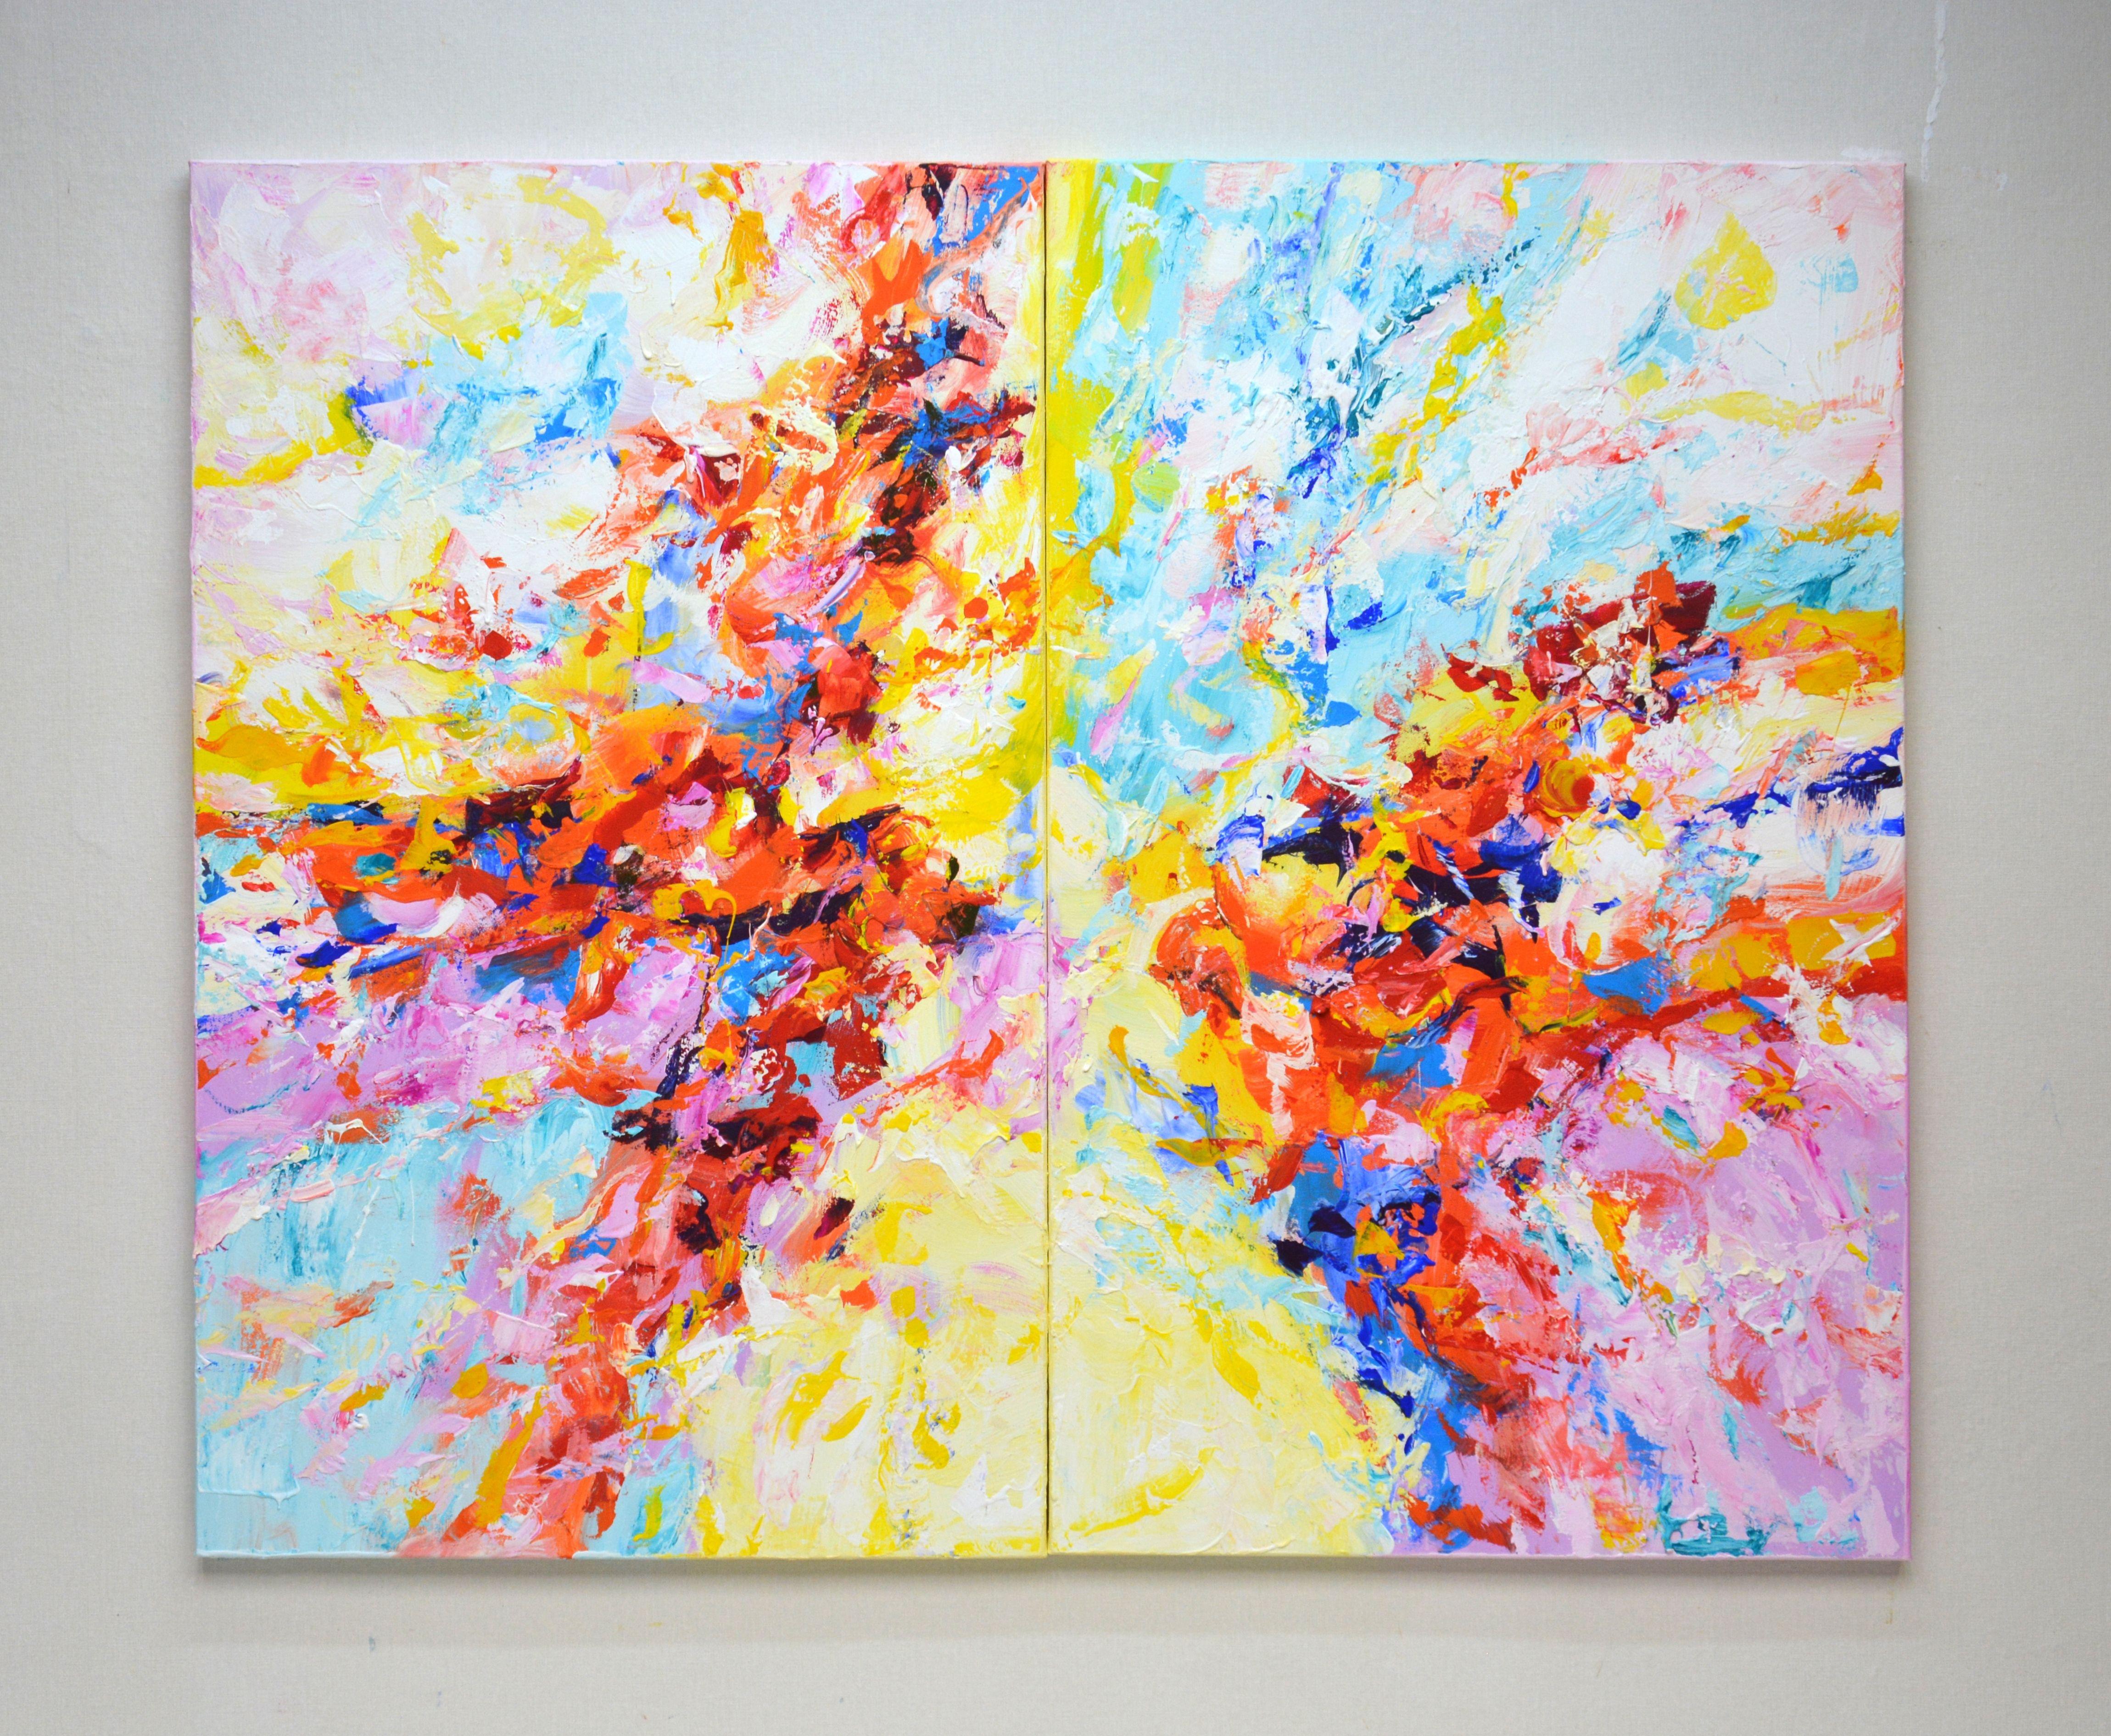 New expression. This original abstract painting made of acrylic, in two parts, a diptych, can become an accent in your interior. Can be hung upside down. The product has a modern aesthetic design and is filled with positive energy. Colors overlap